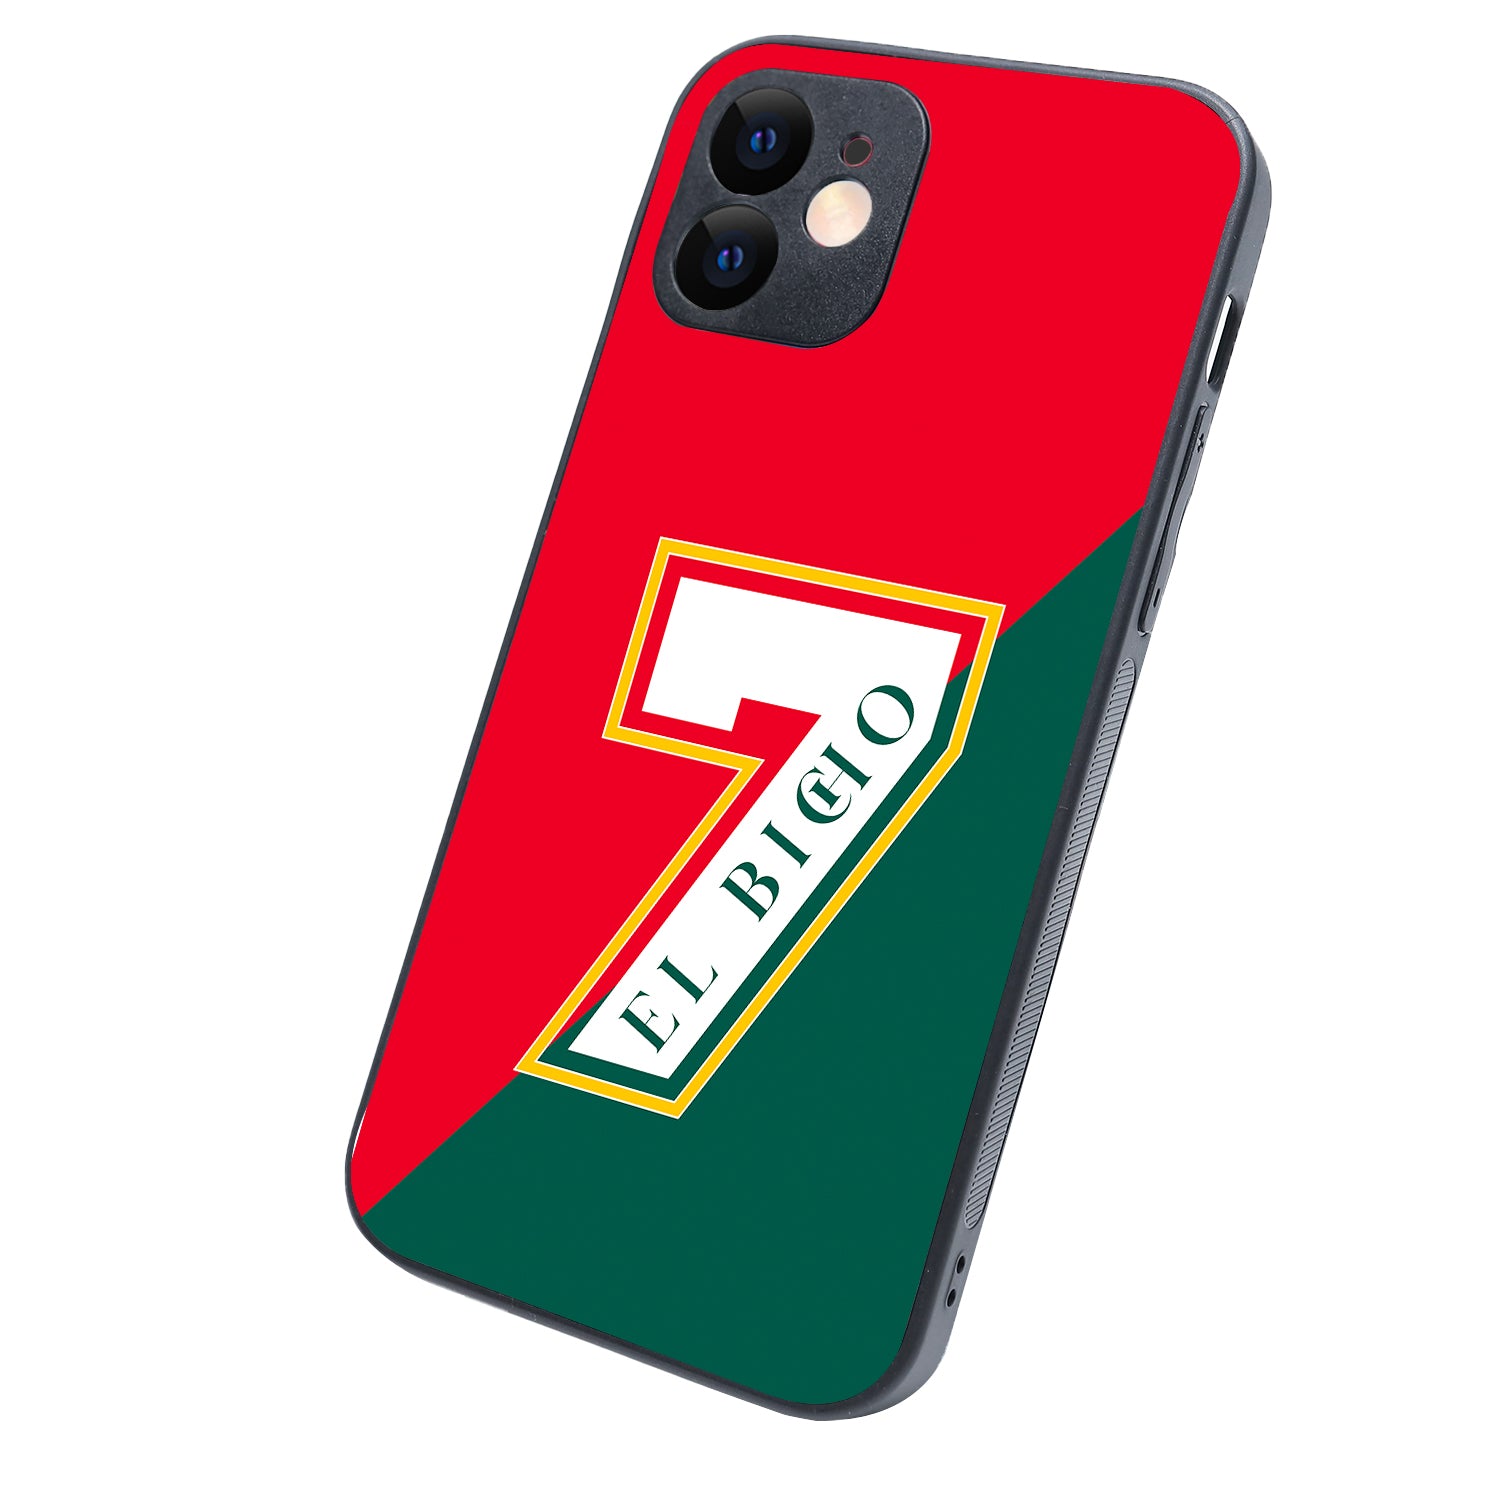 Jersey 7 Sports iPhone 12 Case